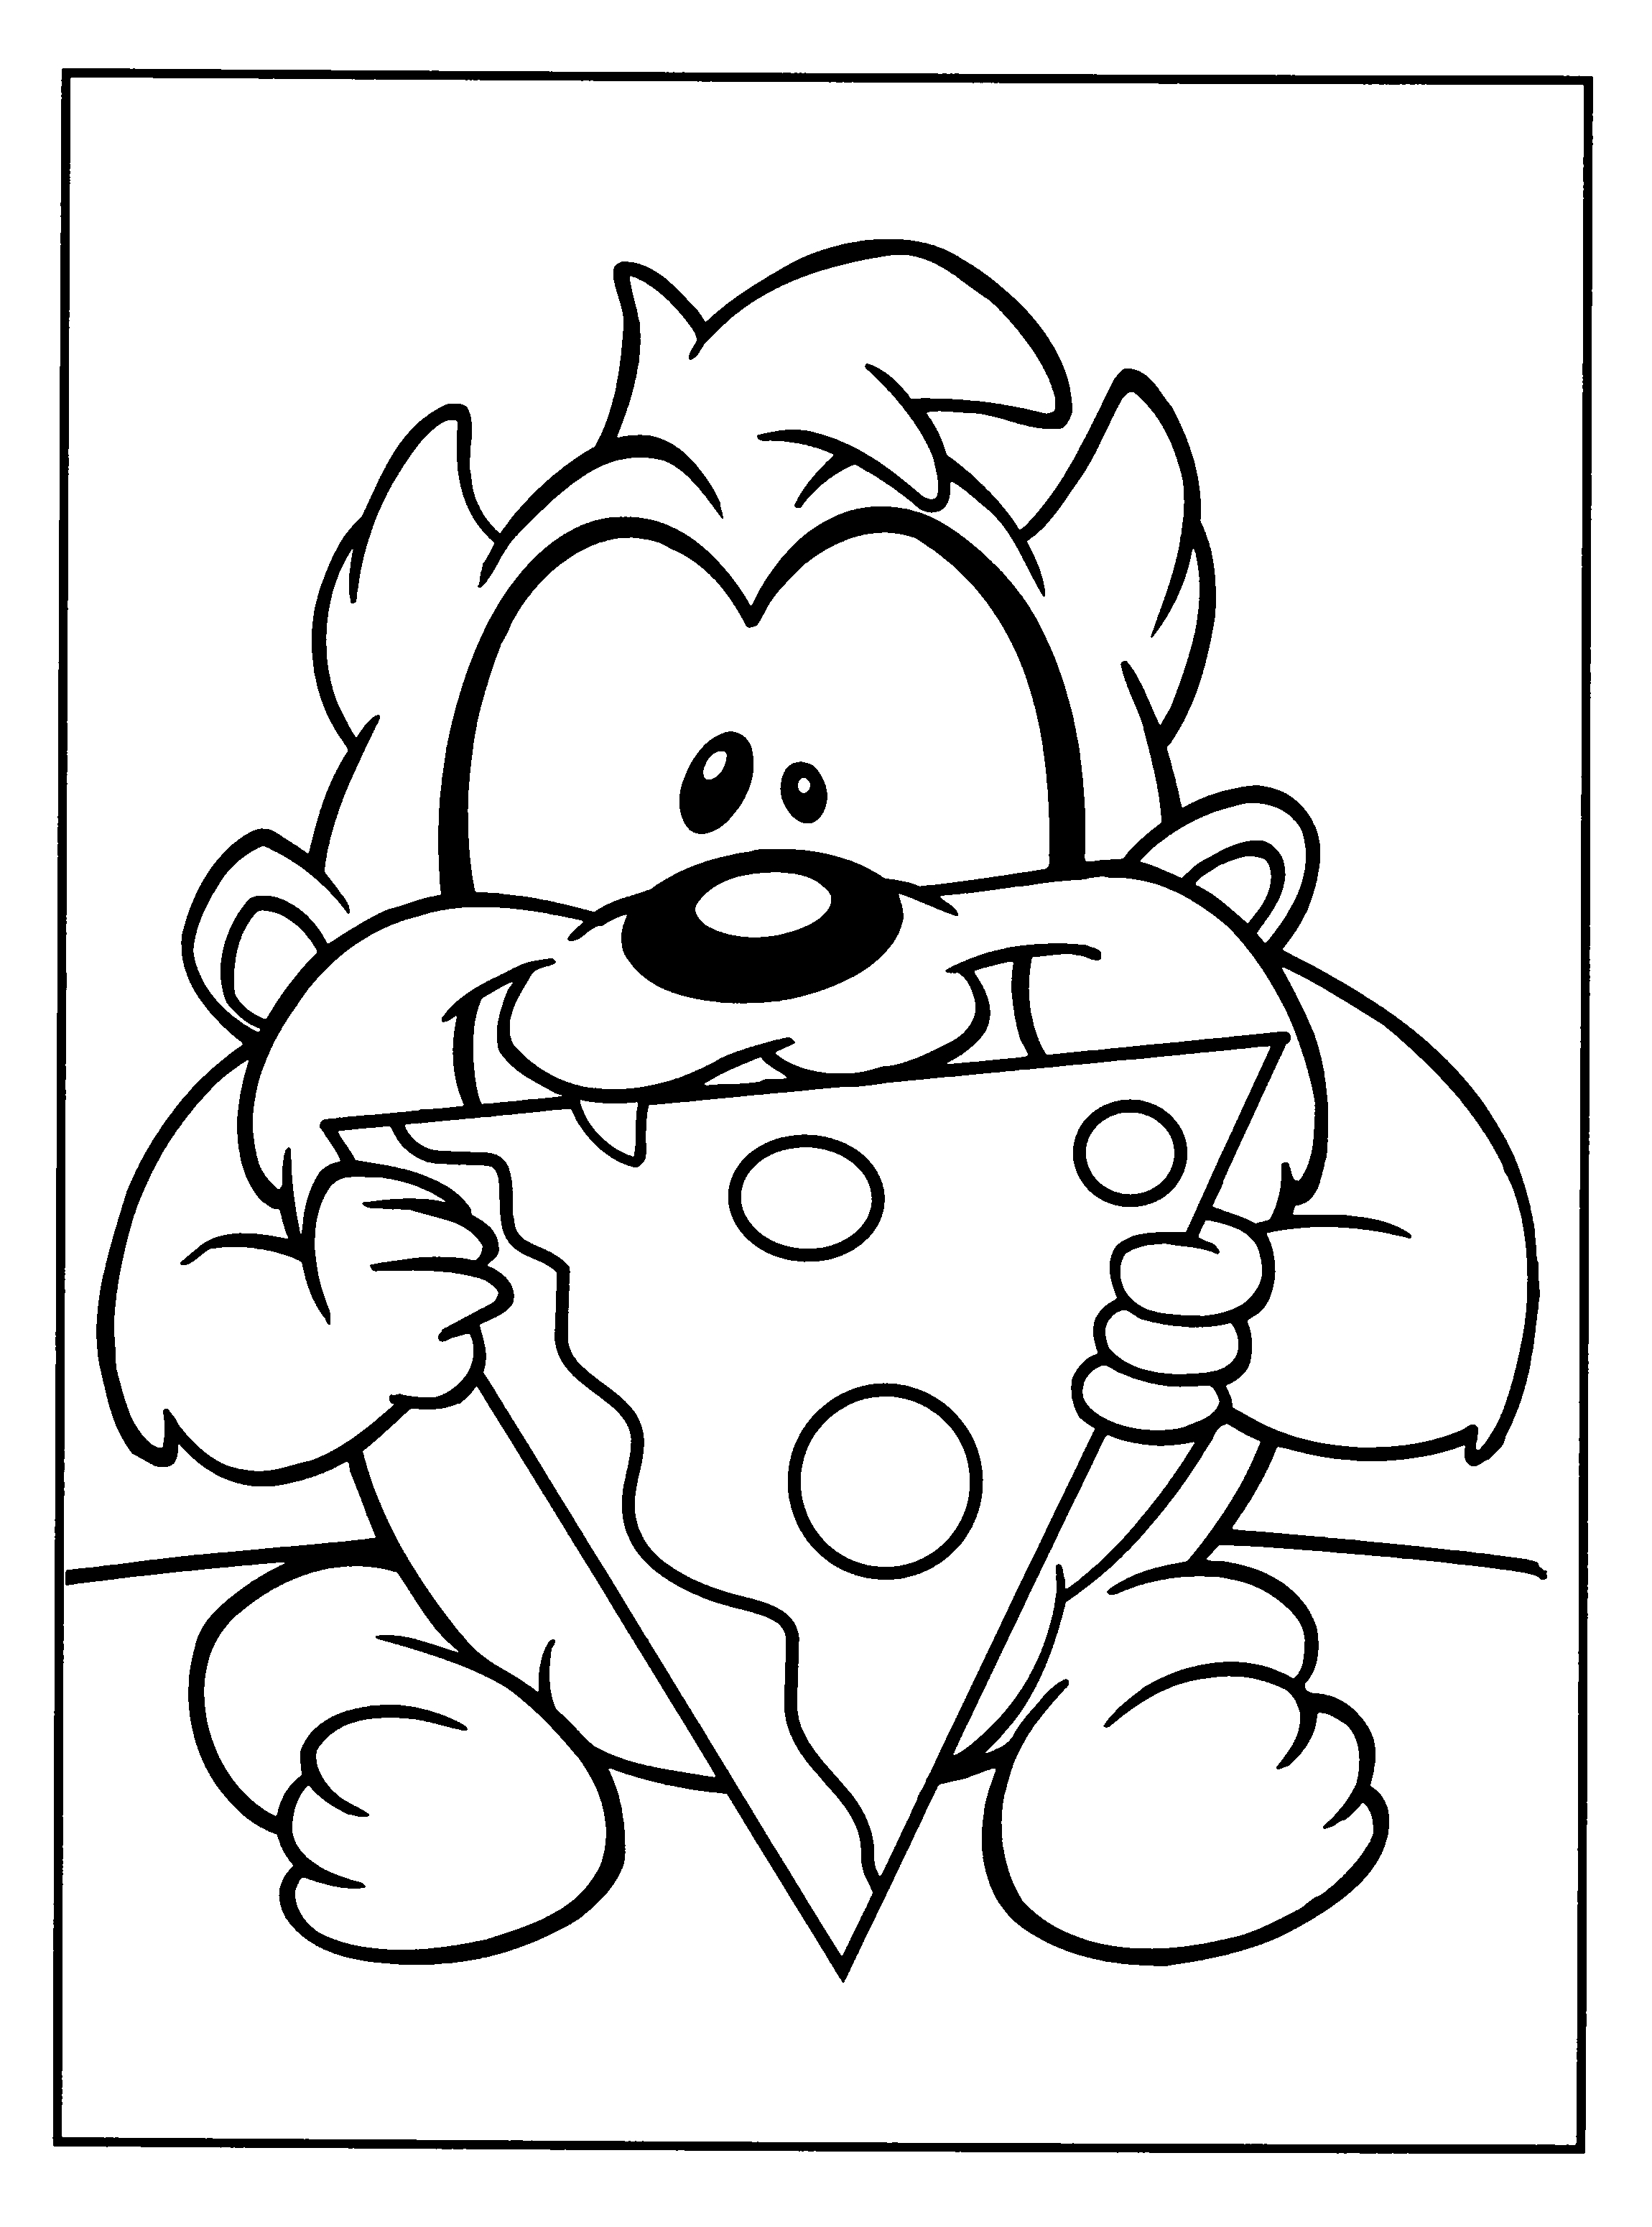 Taz Cartoon Coloring Pages Ba Looney Tunes Taz Coloring Pages